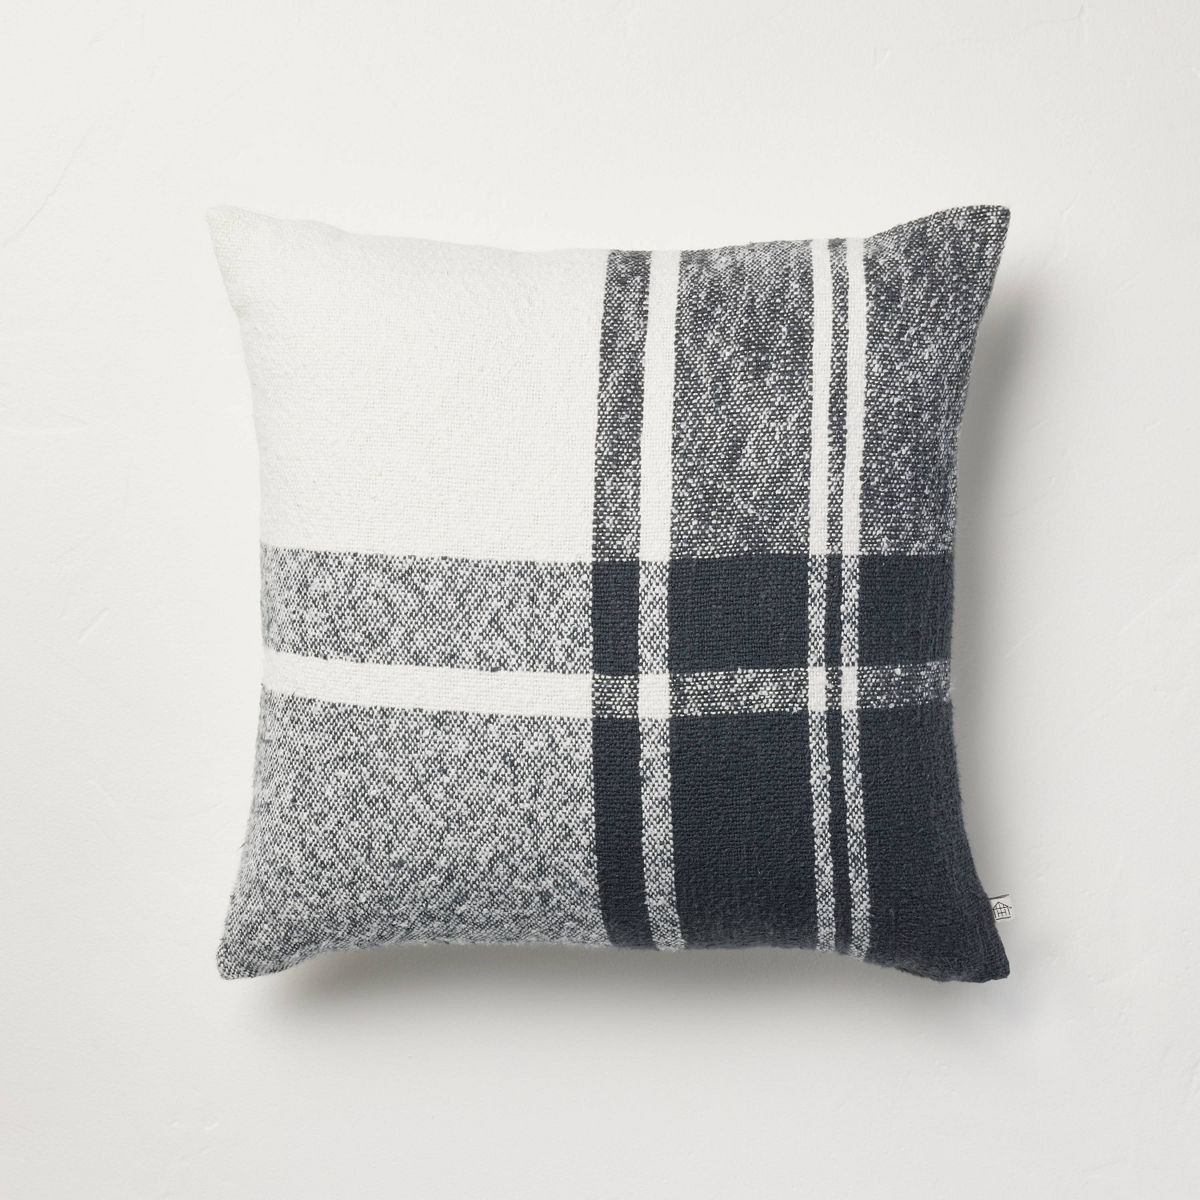 18"x18" Block Plaid Square Throw Pillow - Hearth & Hand™ with Magnolia | Target